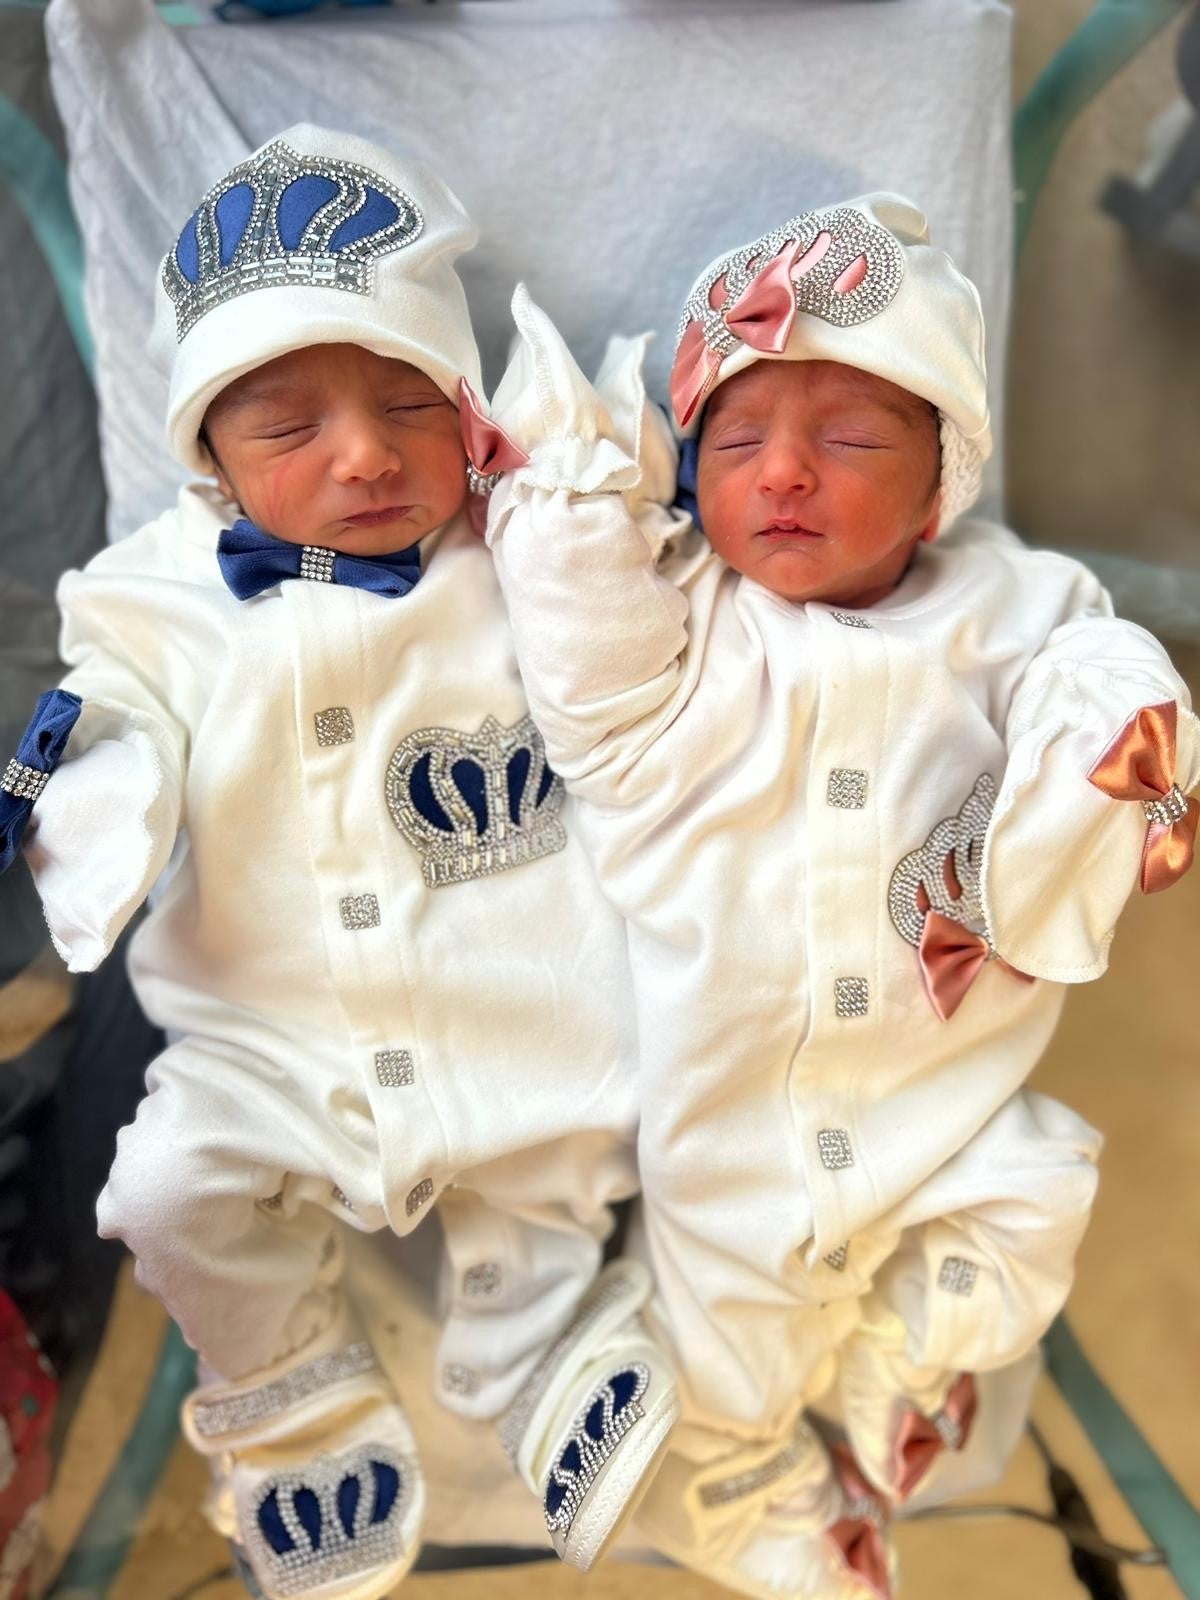 Jami (left) and his sister Rumi, who were born either side of midnight